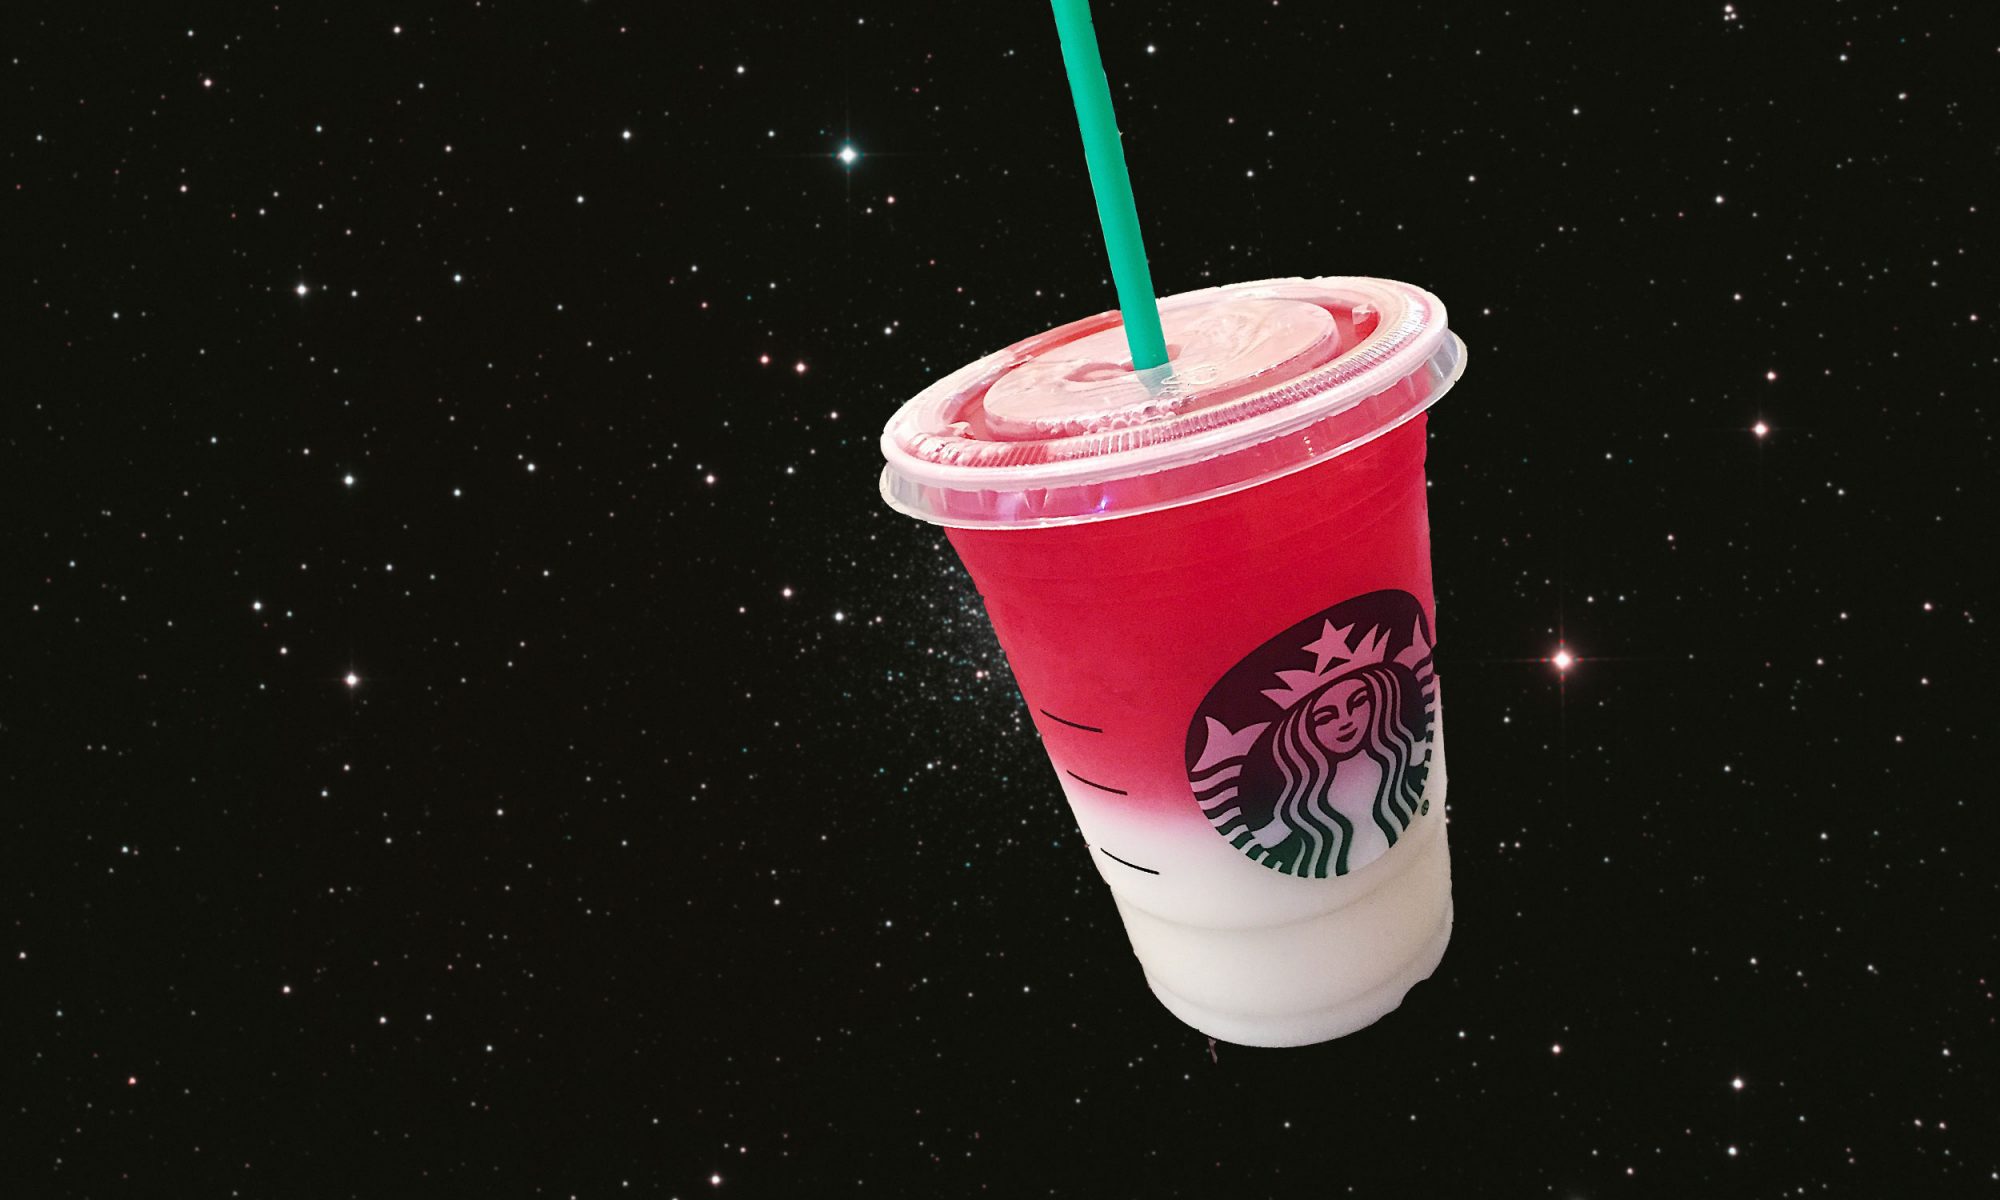 EC: The New Starbucks Ombre Pink Drink Looks Good But Tastes Meh